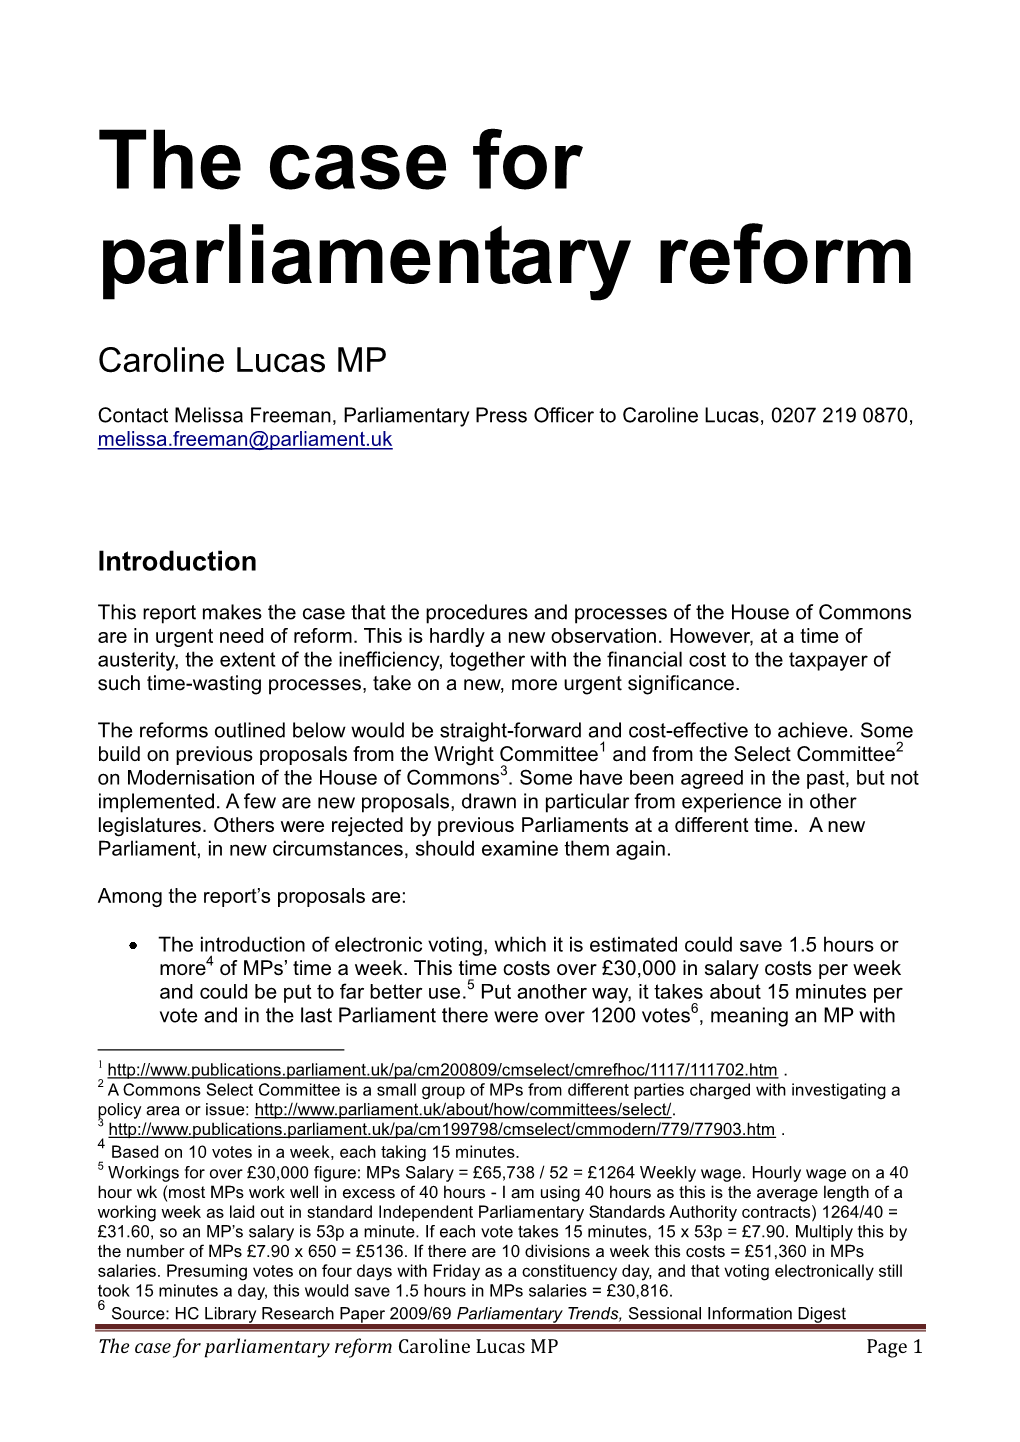 The Case for Parliamentary Reform